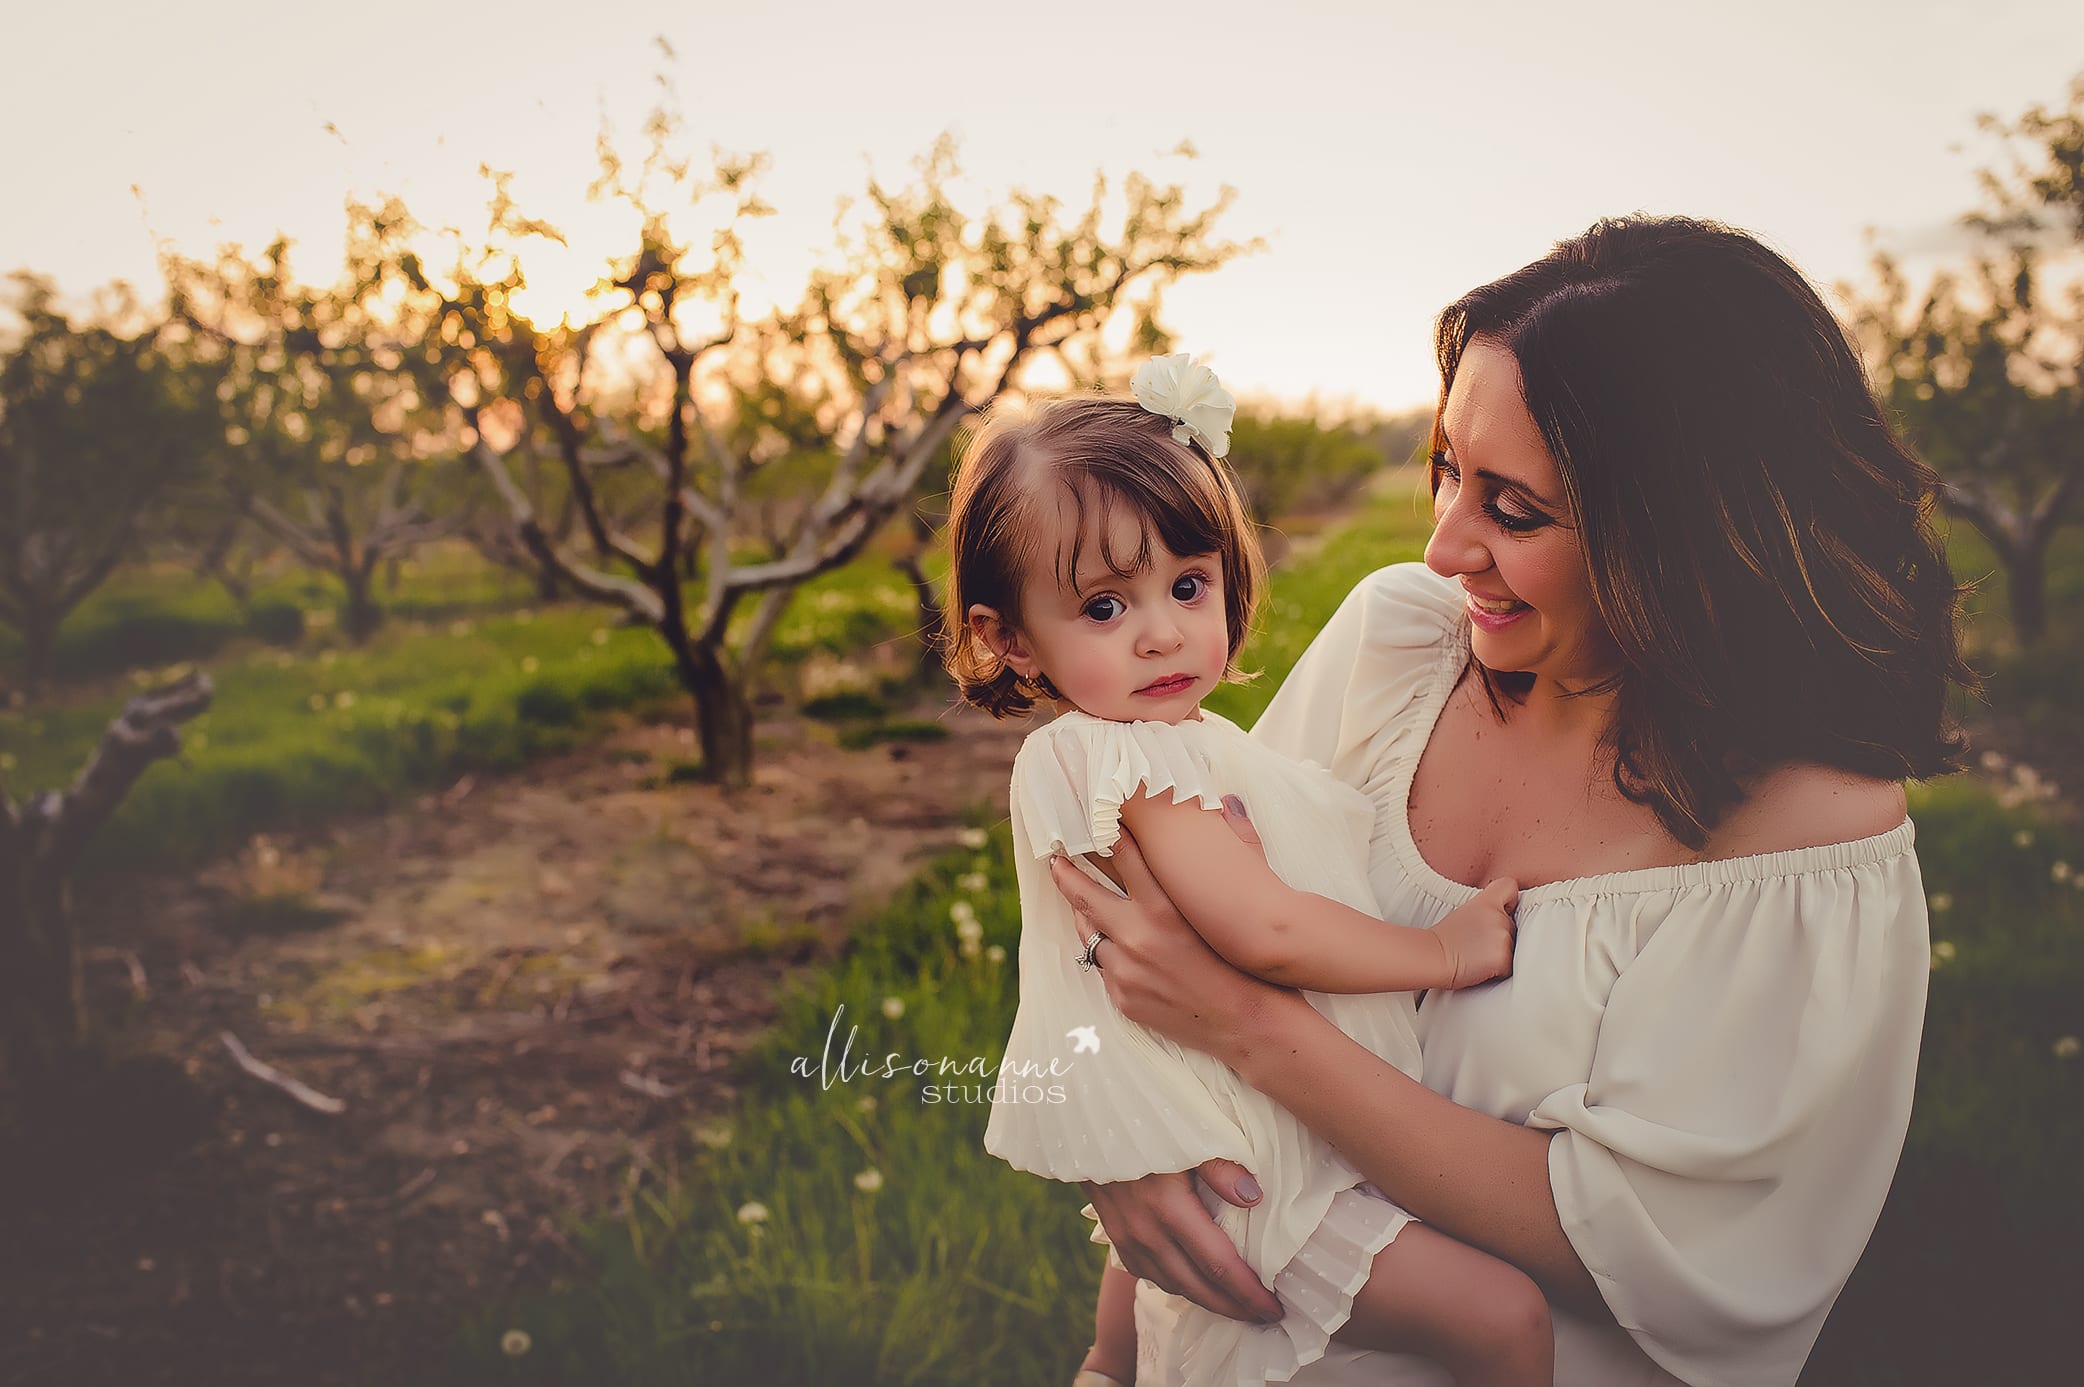 Mother's Day, generations, family bonds, A mother's love, mothers day mini sessions, love, AllisonAnne Studios, Allison Gallagher, Hammonton, Peach fields, mother daughter portraits, returning clients